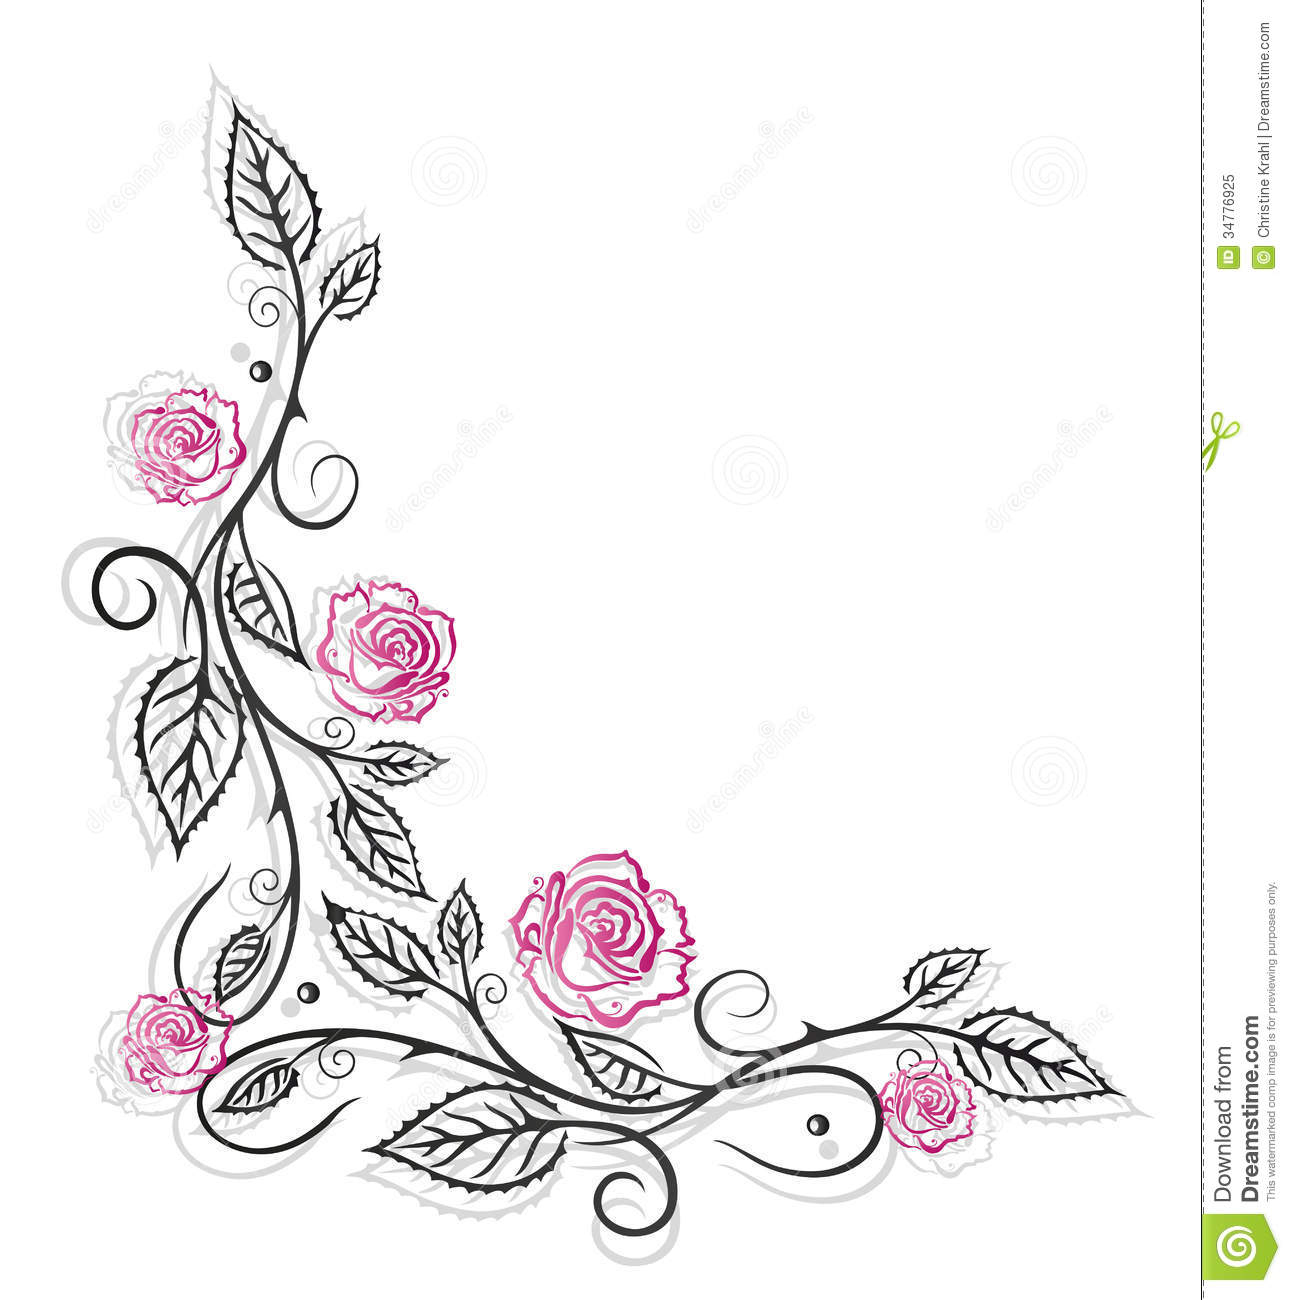 Leaves Roses Vintage Royalty Free Stock Photo   Image  34776925